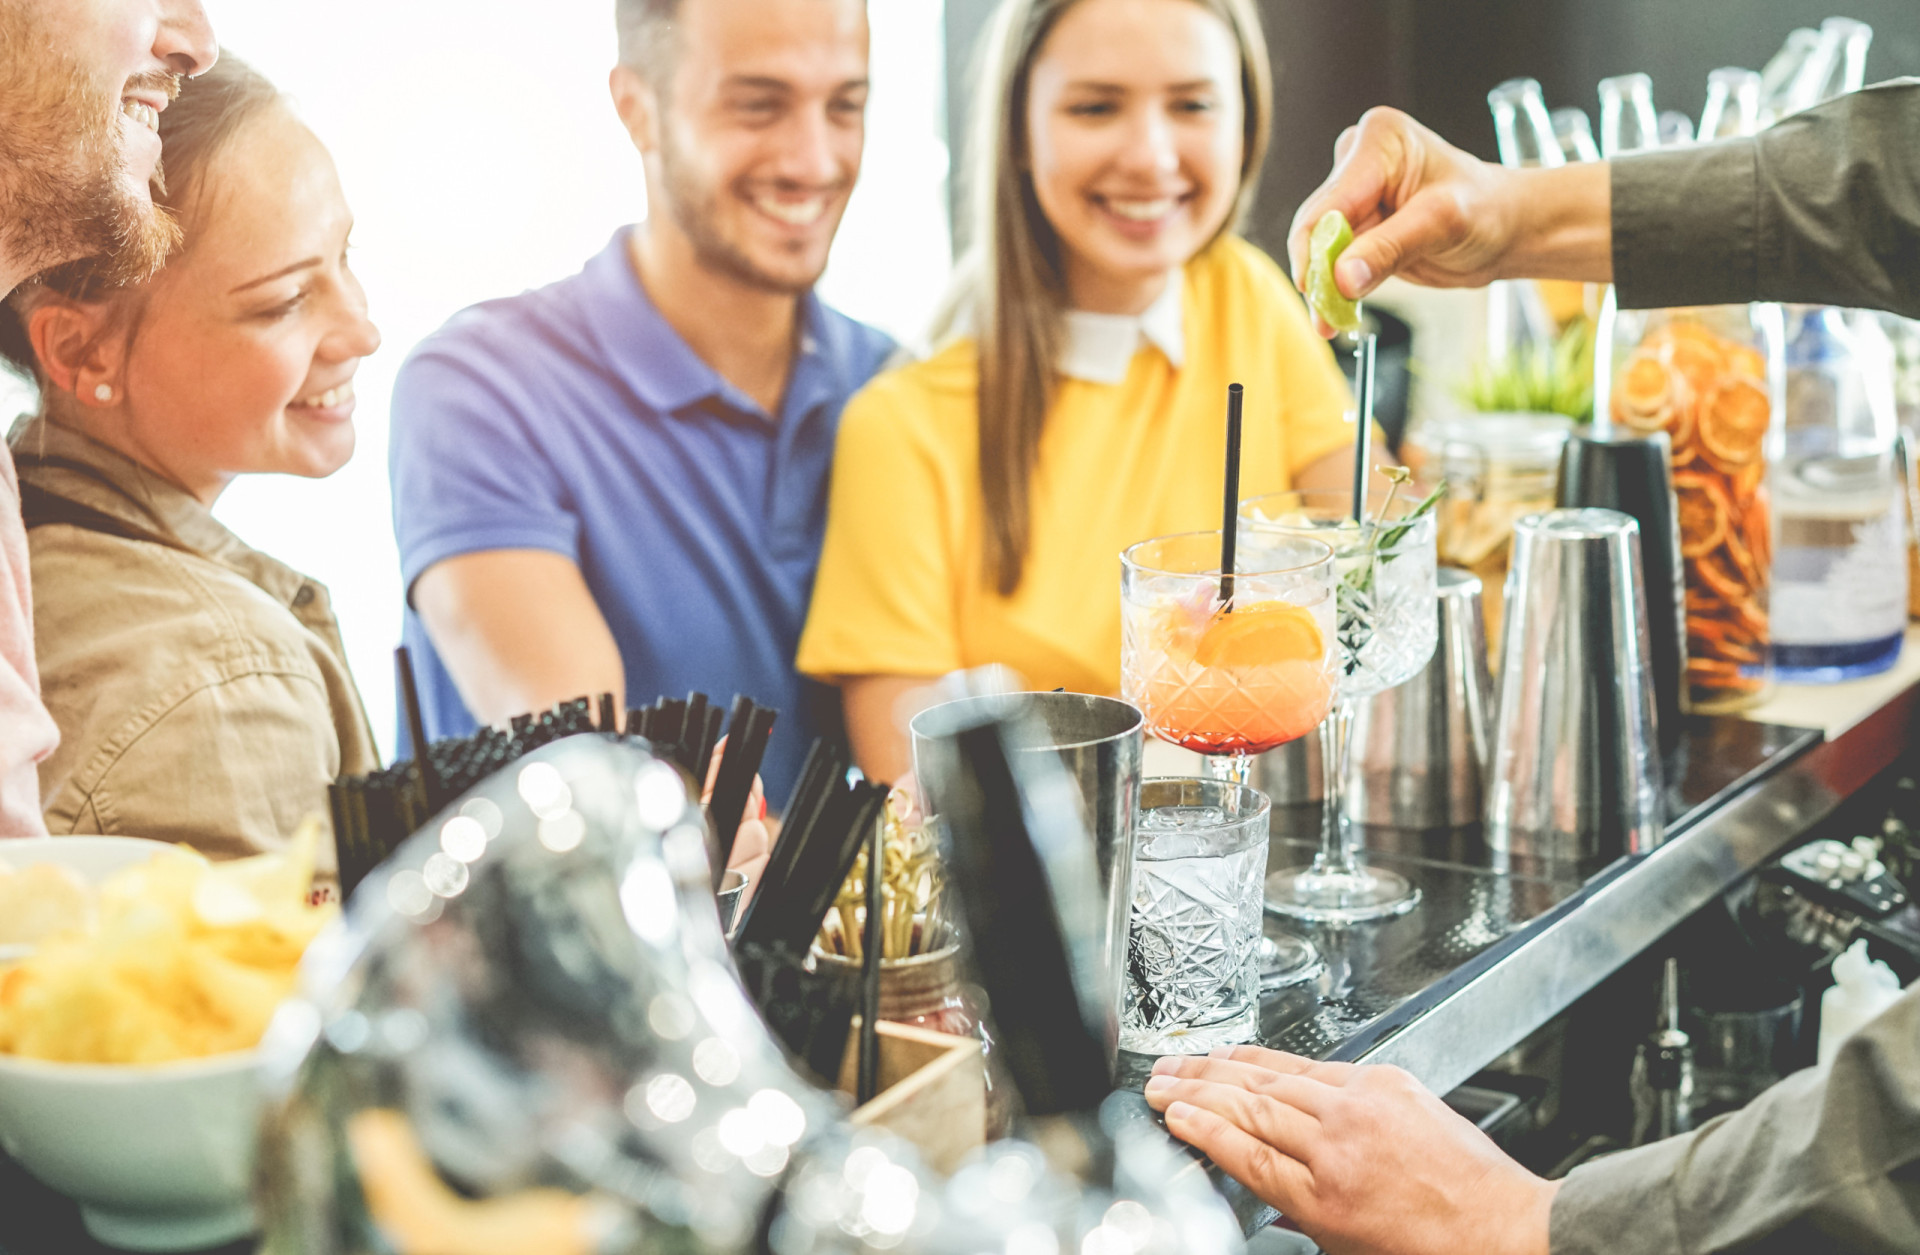 <p>While all-inclusive resorts usually include alcoholic beverages, guests are often disappointed to learn that only "cheap" or "bottom shelf" liquor is included. Find out if they serve premium brand spirits.</p><p><a href="https://www.msn.com/en-us/community/channel/vid-7xx8mnucu55yw63we9va2gwr7uihbxwc68fxqp25x6tg4ftibpra?cvid=94631541bc0f4f89bfd59158d696ad7e">Follow us and access great exclusive content every day</a></p>